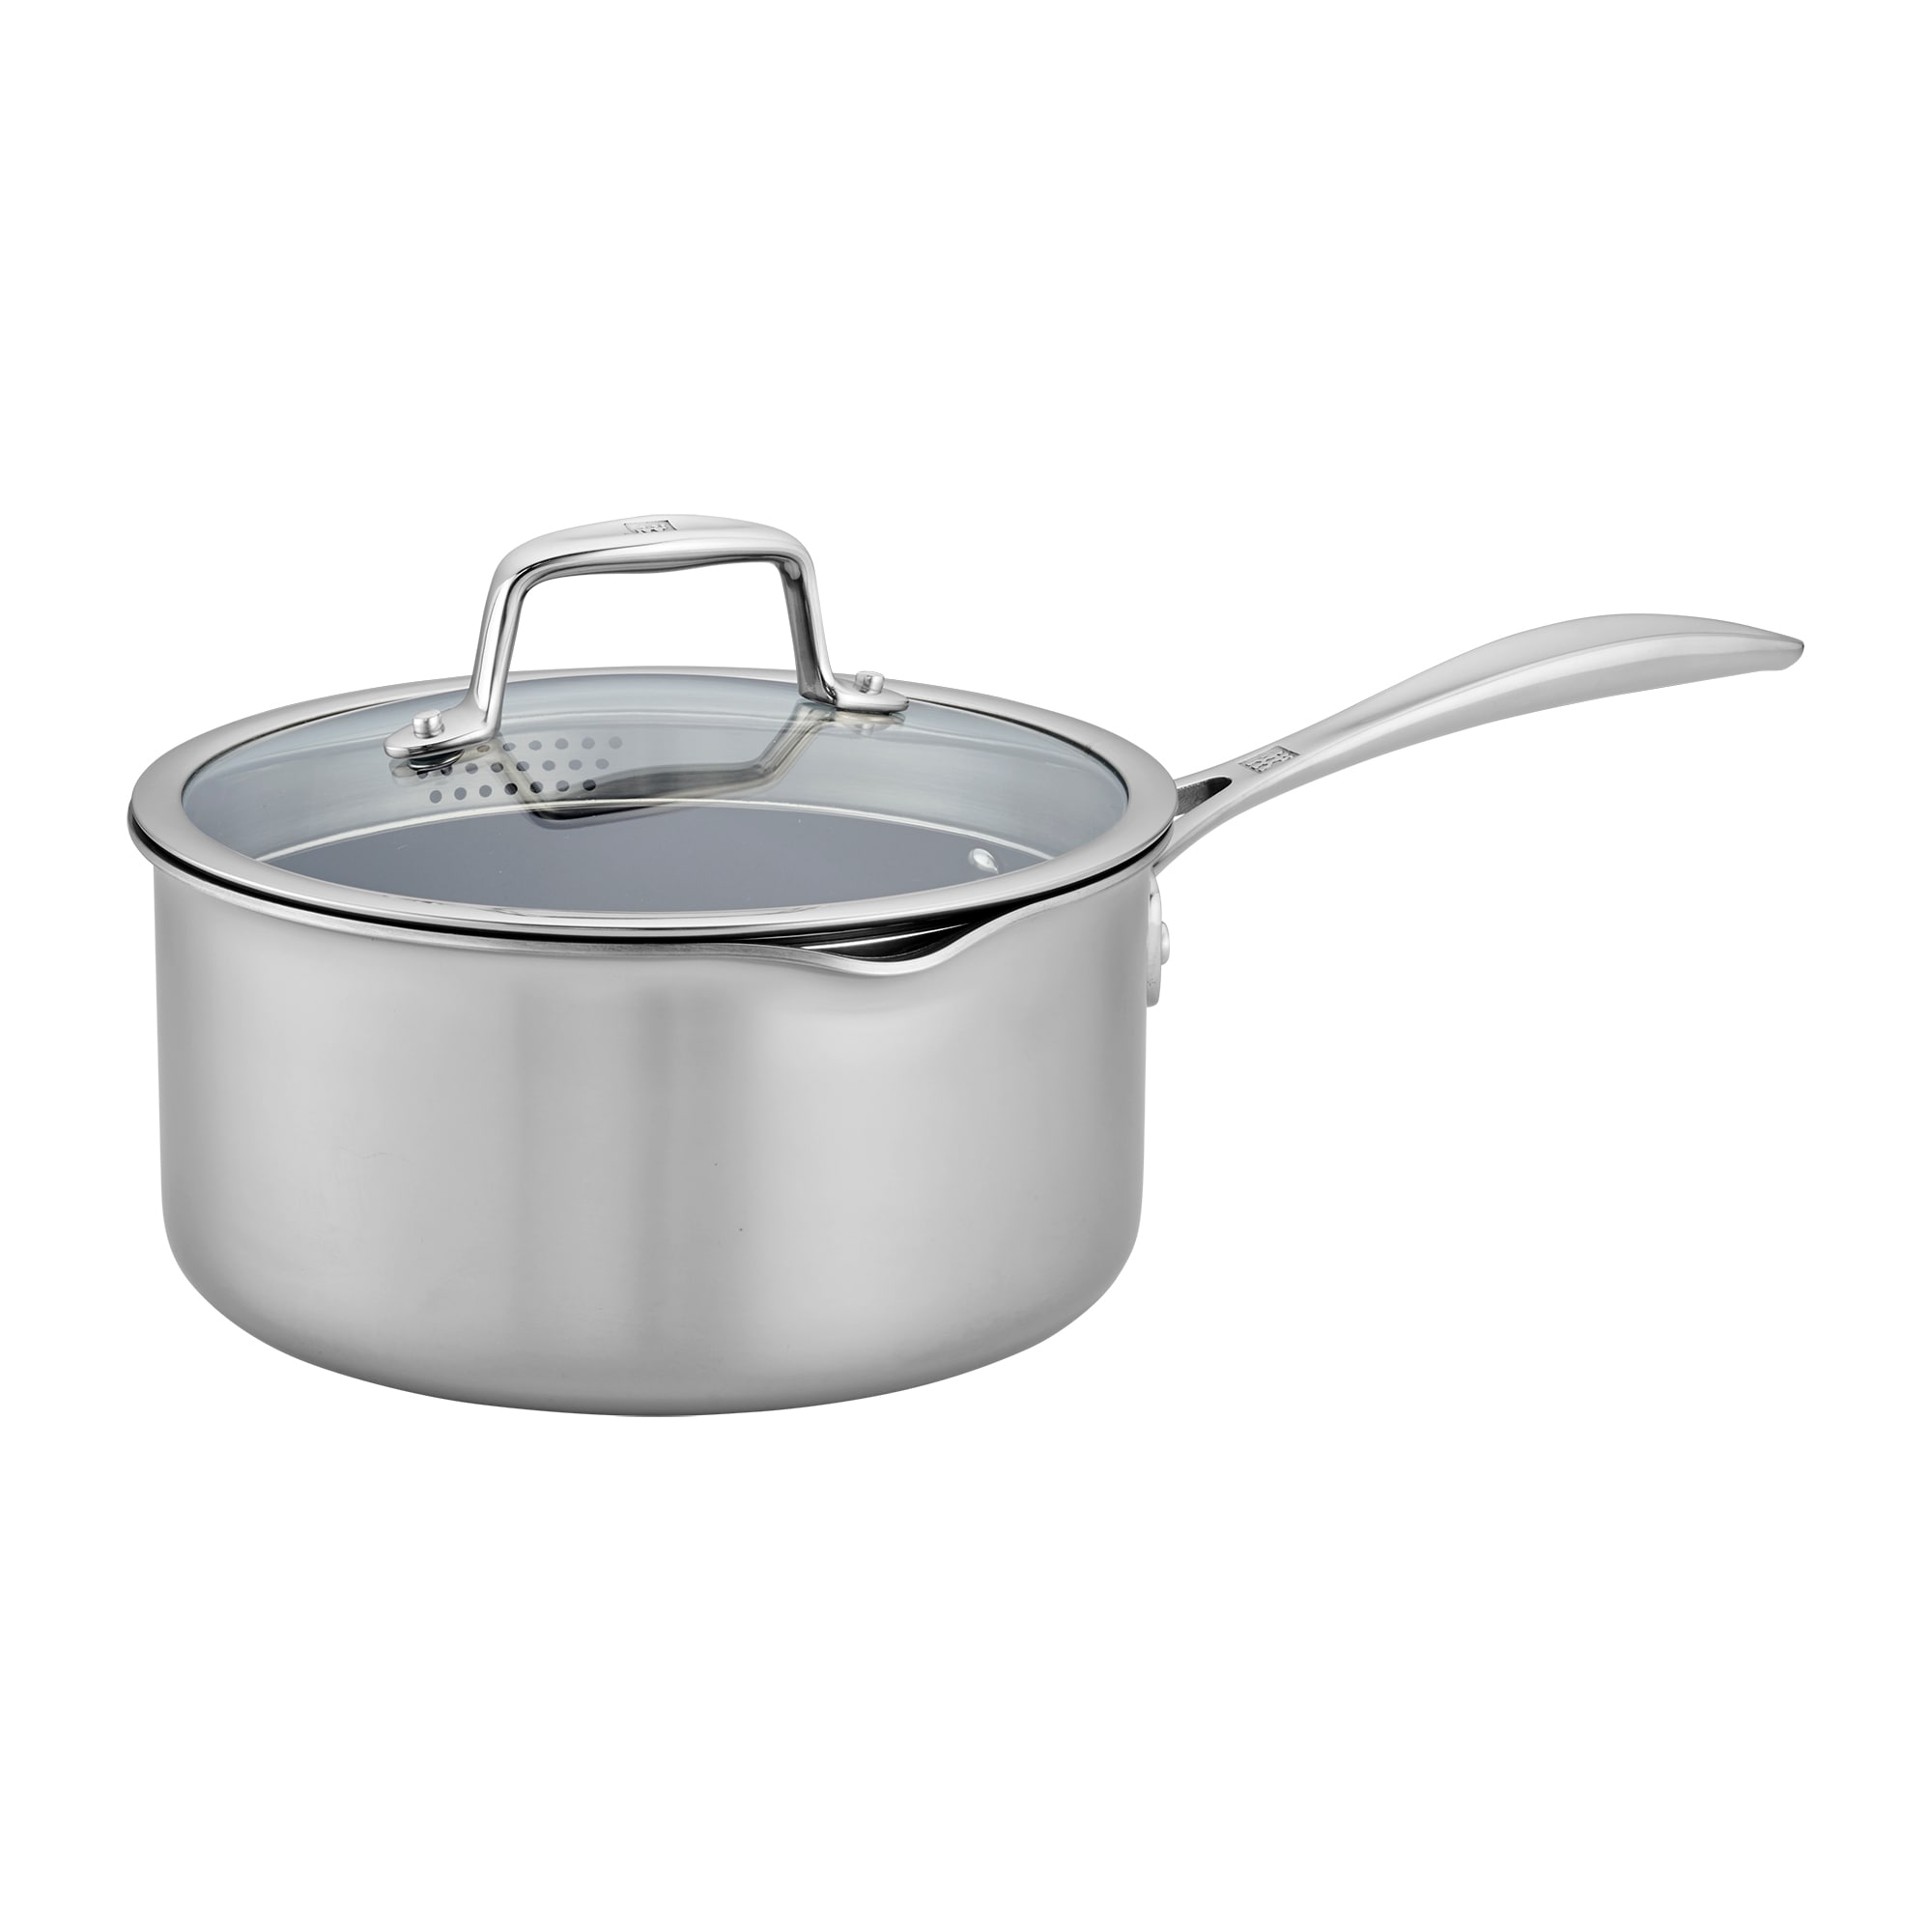 Zwilling Clad CFX 8.5-in Steel with Non-stick Coating Cooking Pan with Lid